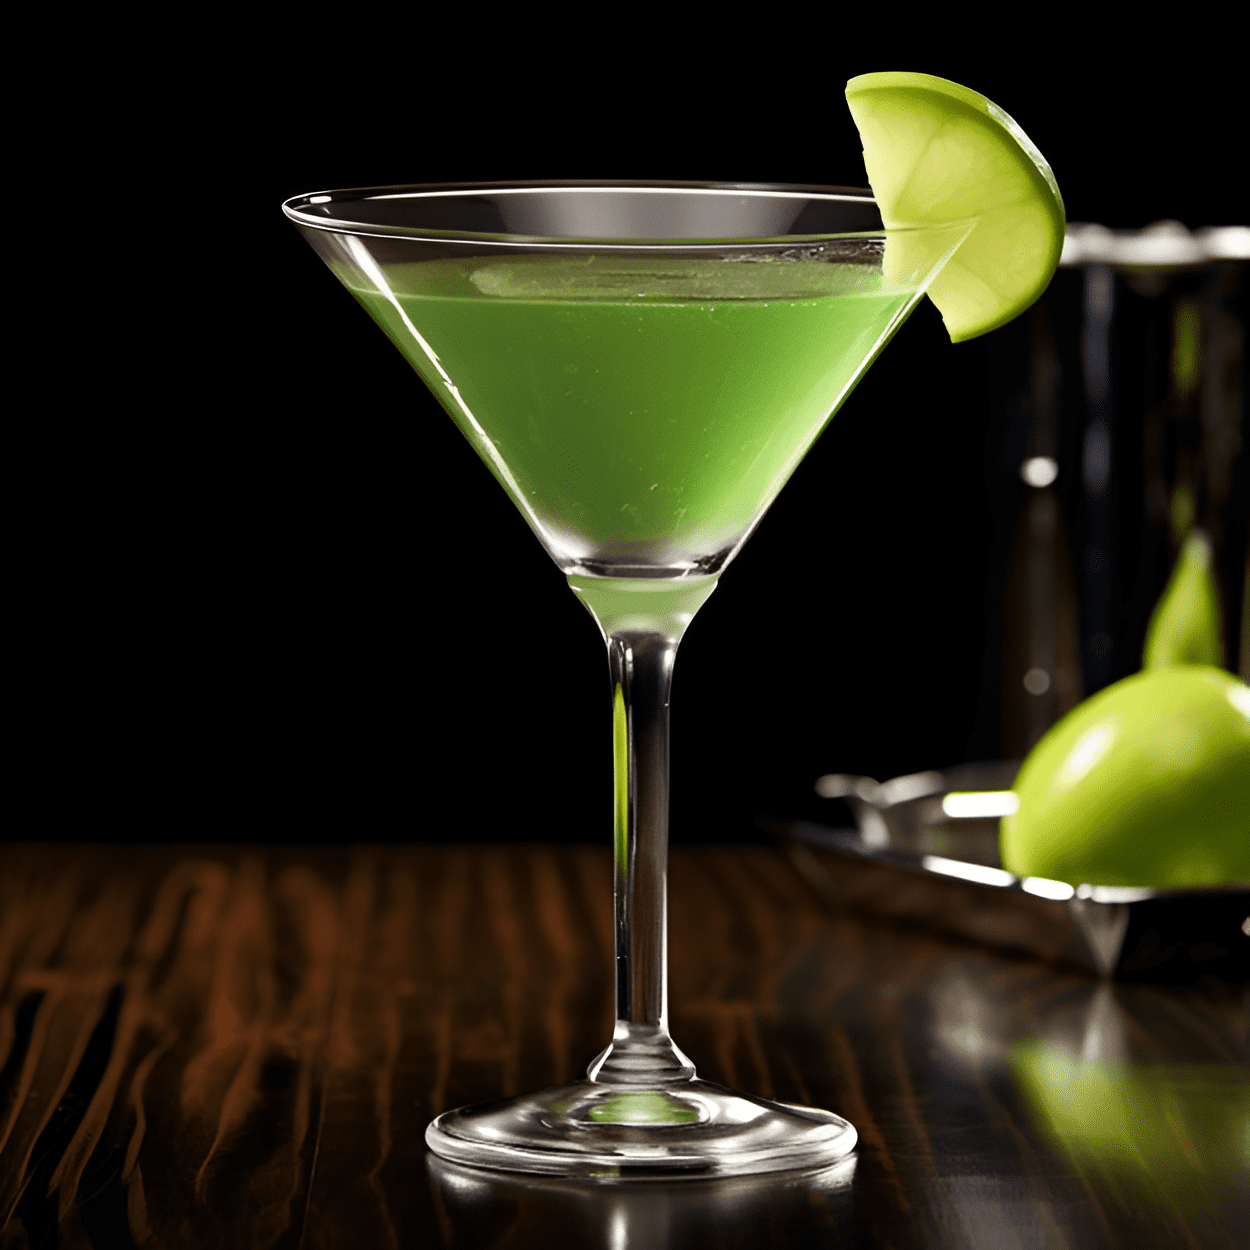 The Apple Martini has a sweet and sour taste, with a crisp and refreshing apple flavor. It is well-balanced, with a slight tartness from the apple and a smooth, velvety finish from the vodka.